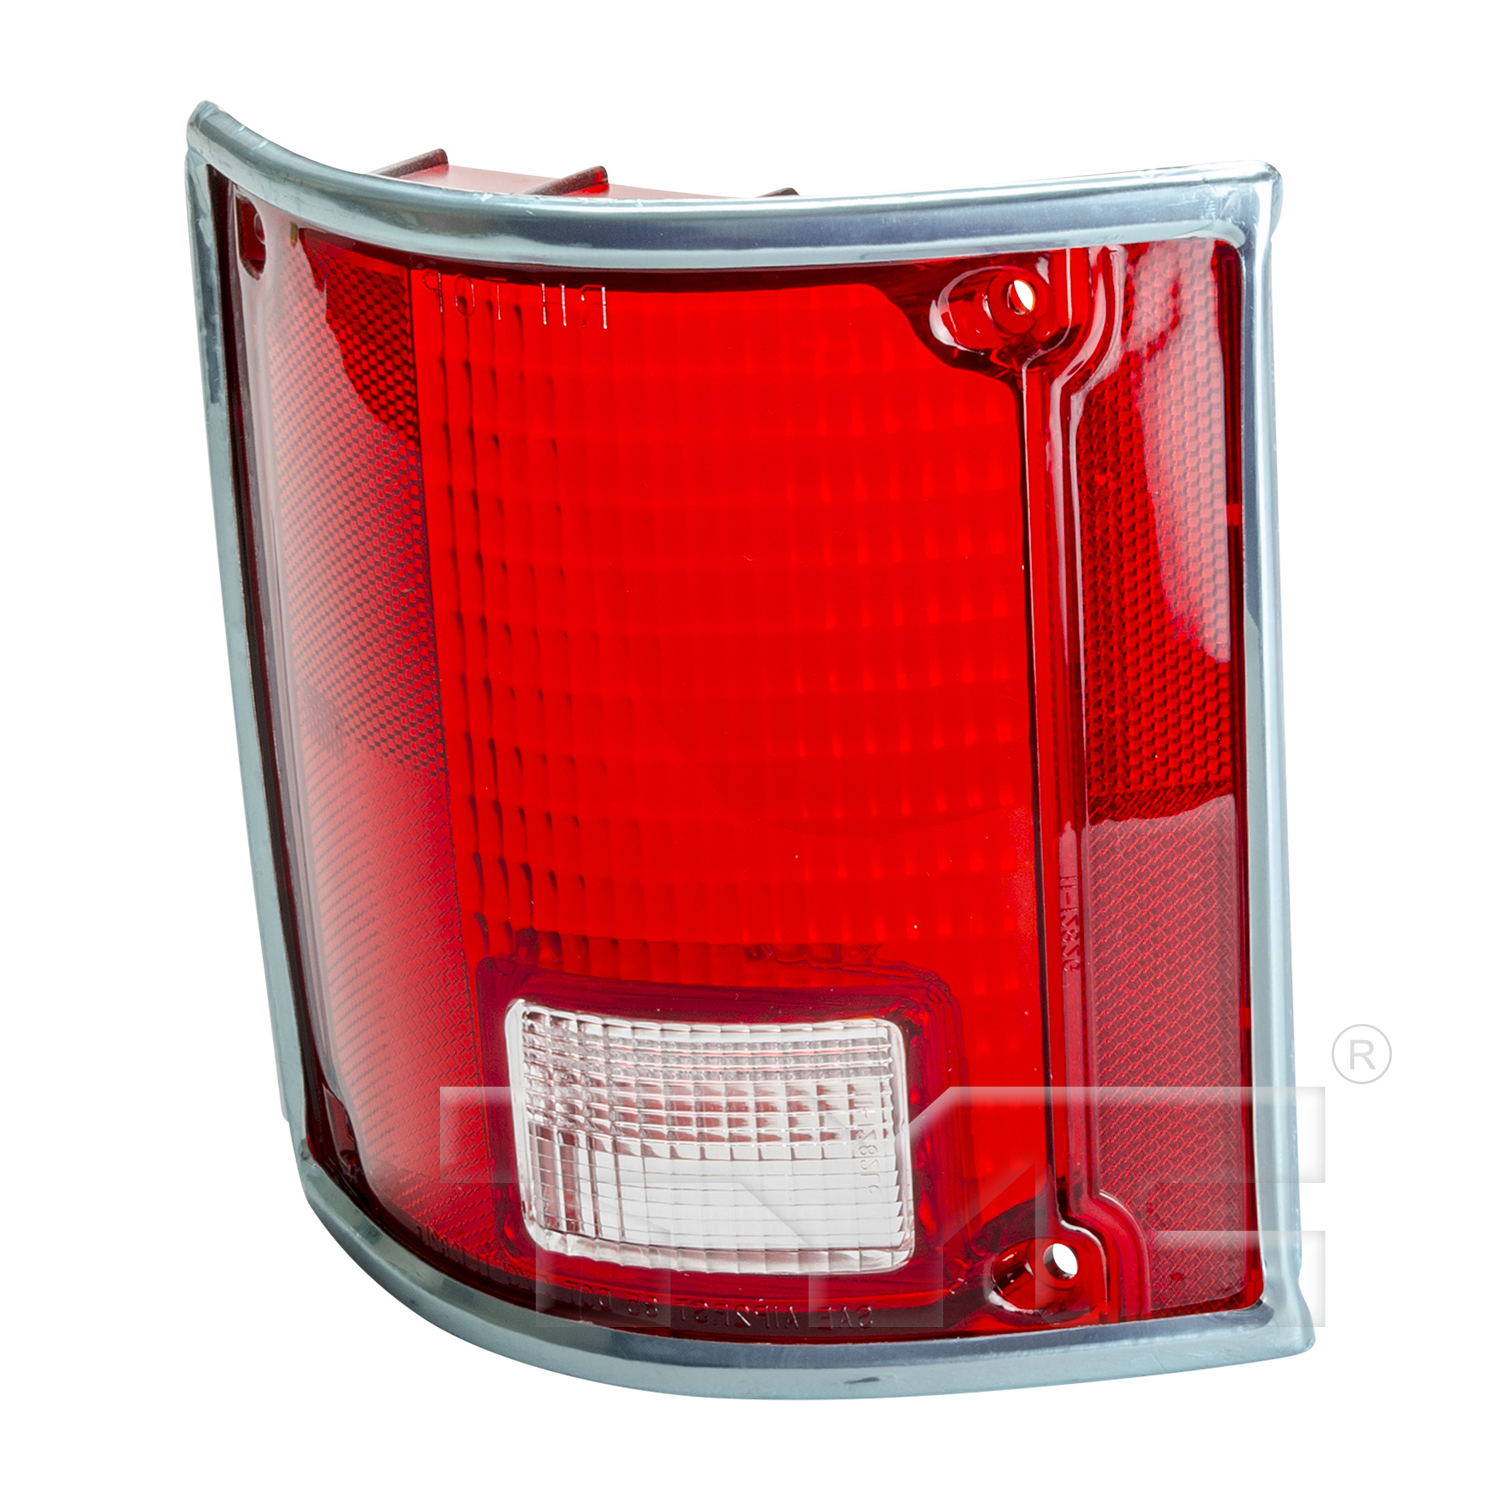 Aftermarket TAILLIGHTS for CHEVROLET - C20 SUBURBAN, C20 SUBURBAN,73-86,LT Taillamp lens